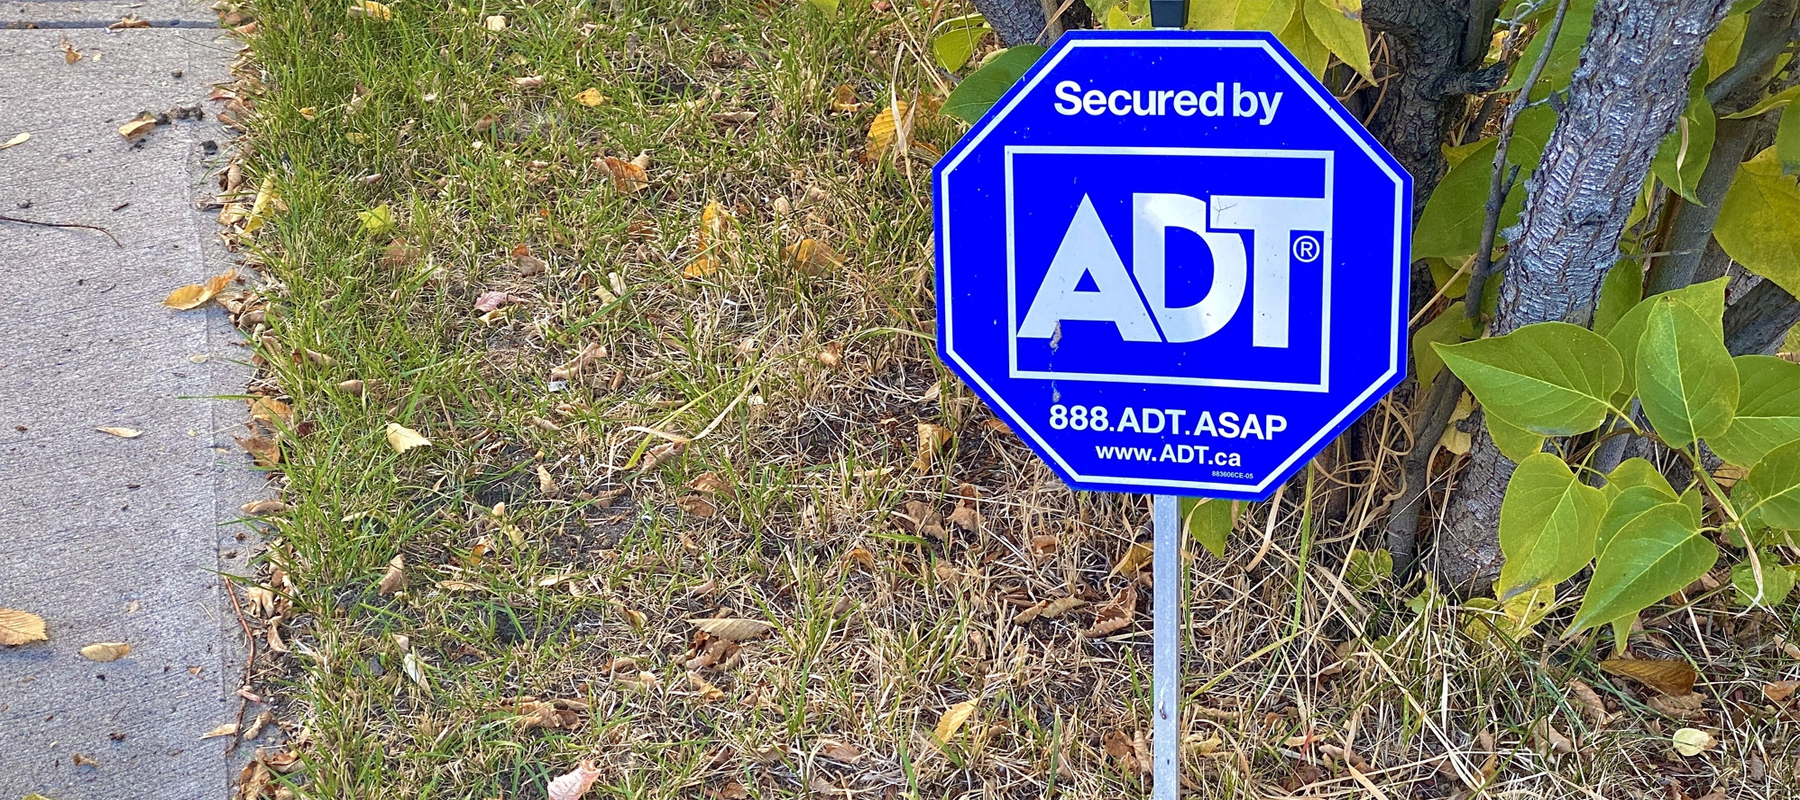 ADT Home Security Sign in Yard